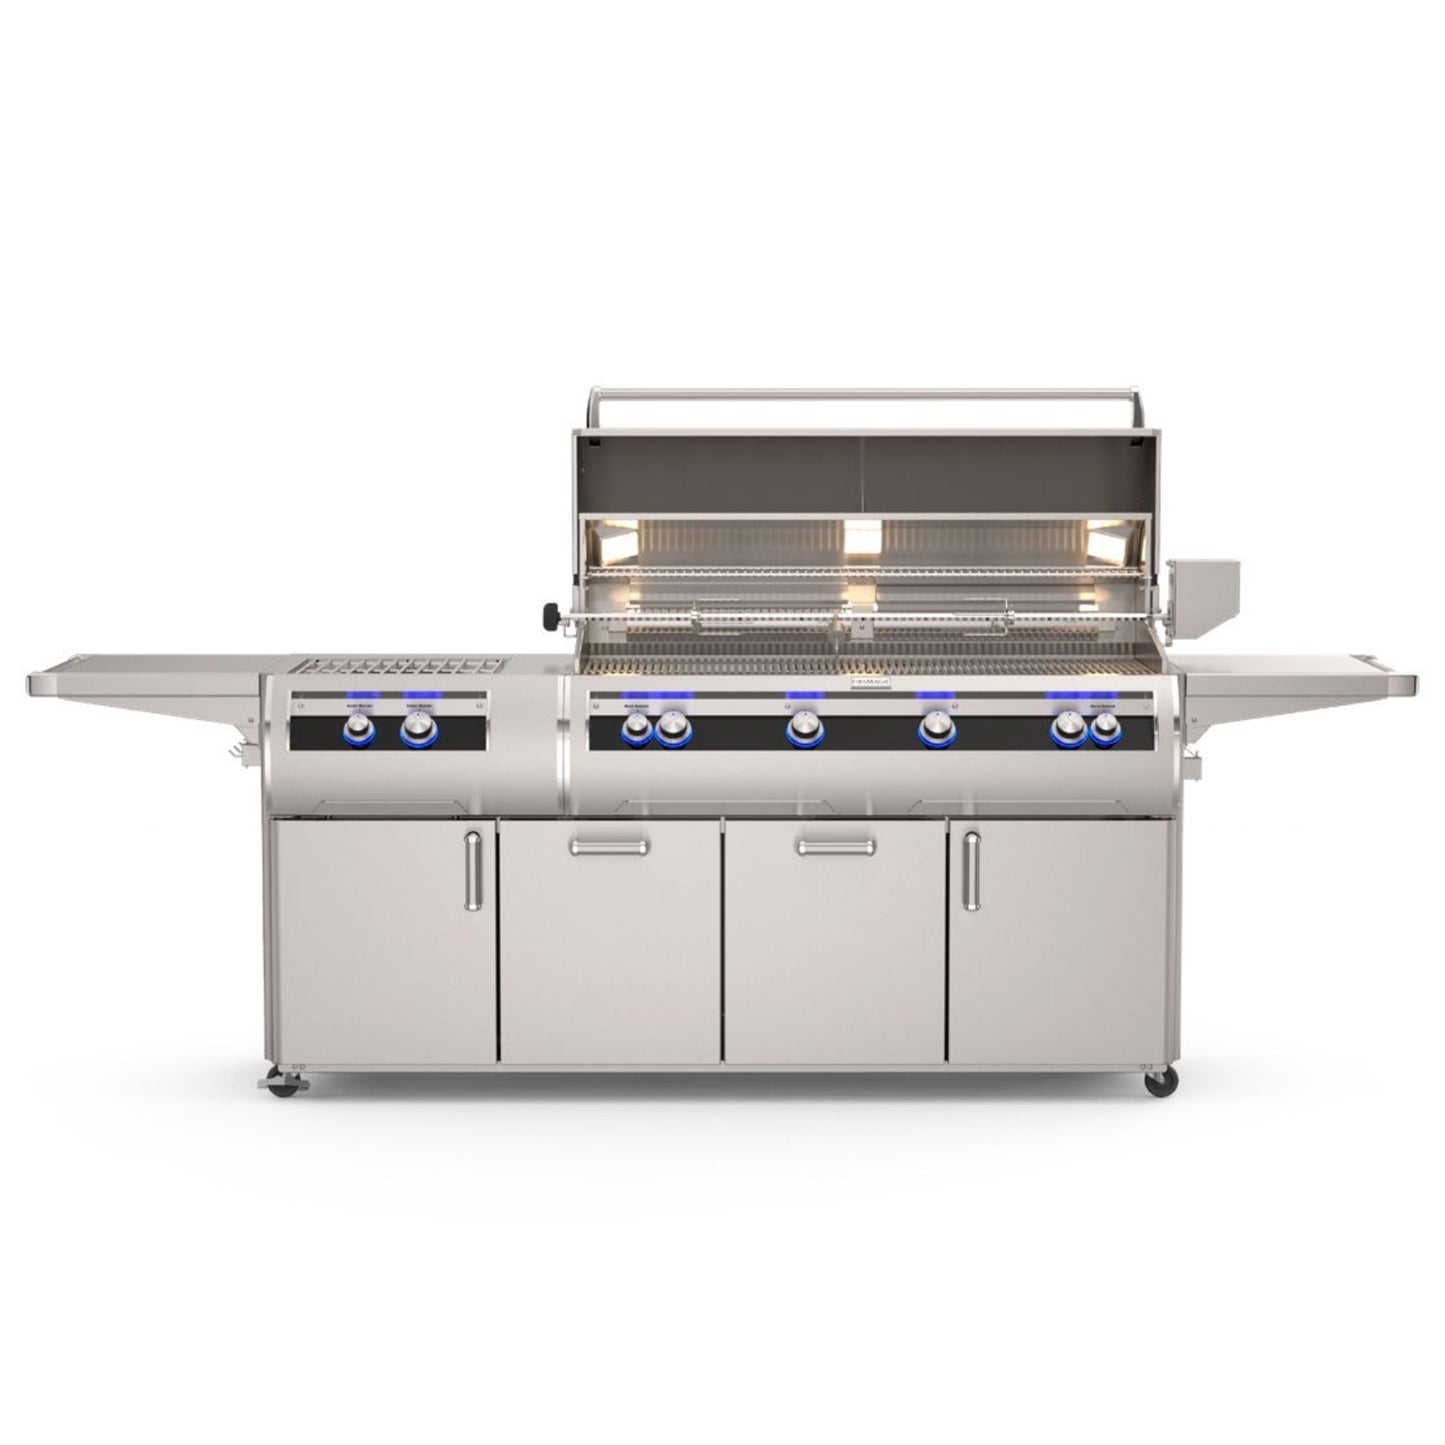 Fire Magic Echelon Diamond E1060s 48" 4-Burner Portable Gas Grill With Power Burner, Analog Thermometer and Optional Magic View Window